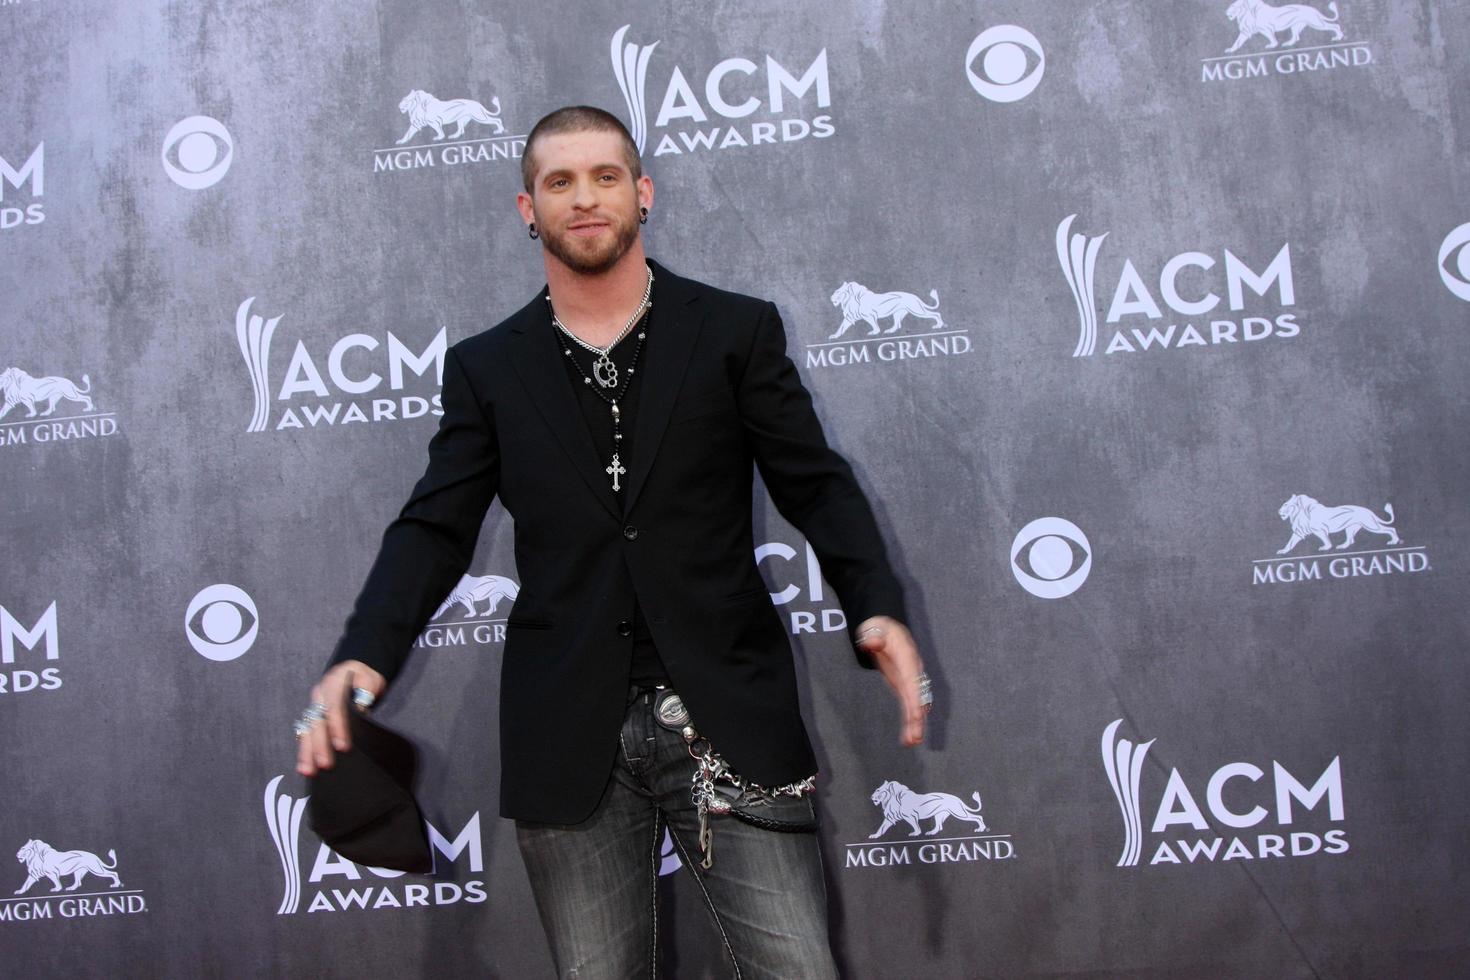 LAS VEGAS, APR 6 - Brantley Gilbert at the 2014 Academy of Country Music Awards, Arrivals at MGM Grand Garden Arena on April 6, 2014 in Las Vegas, NV photo